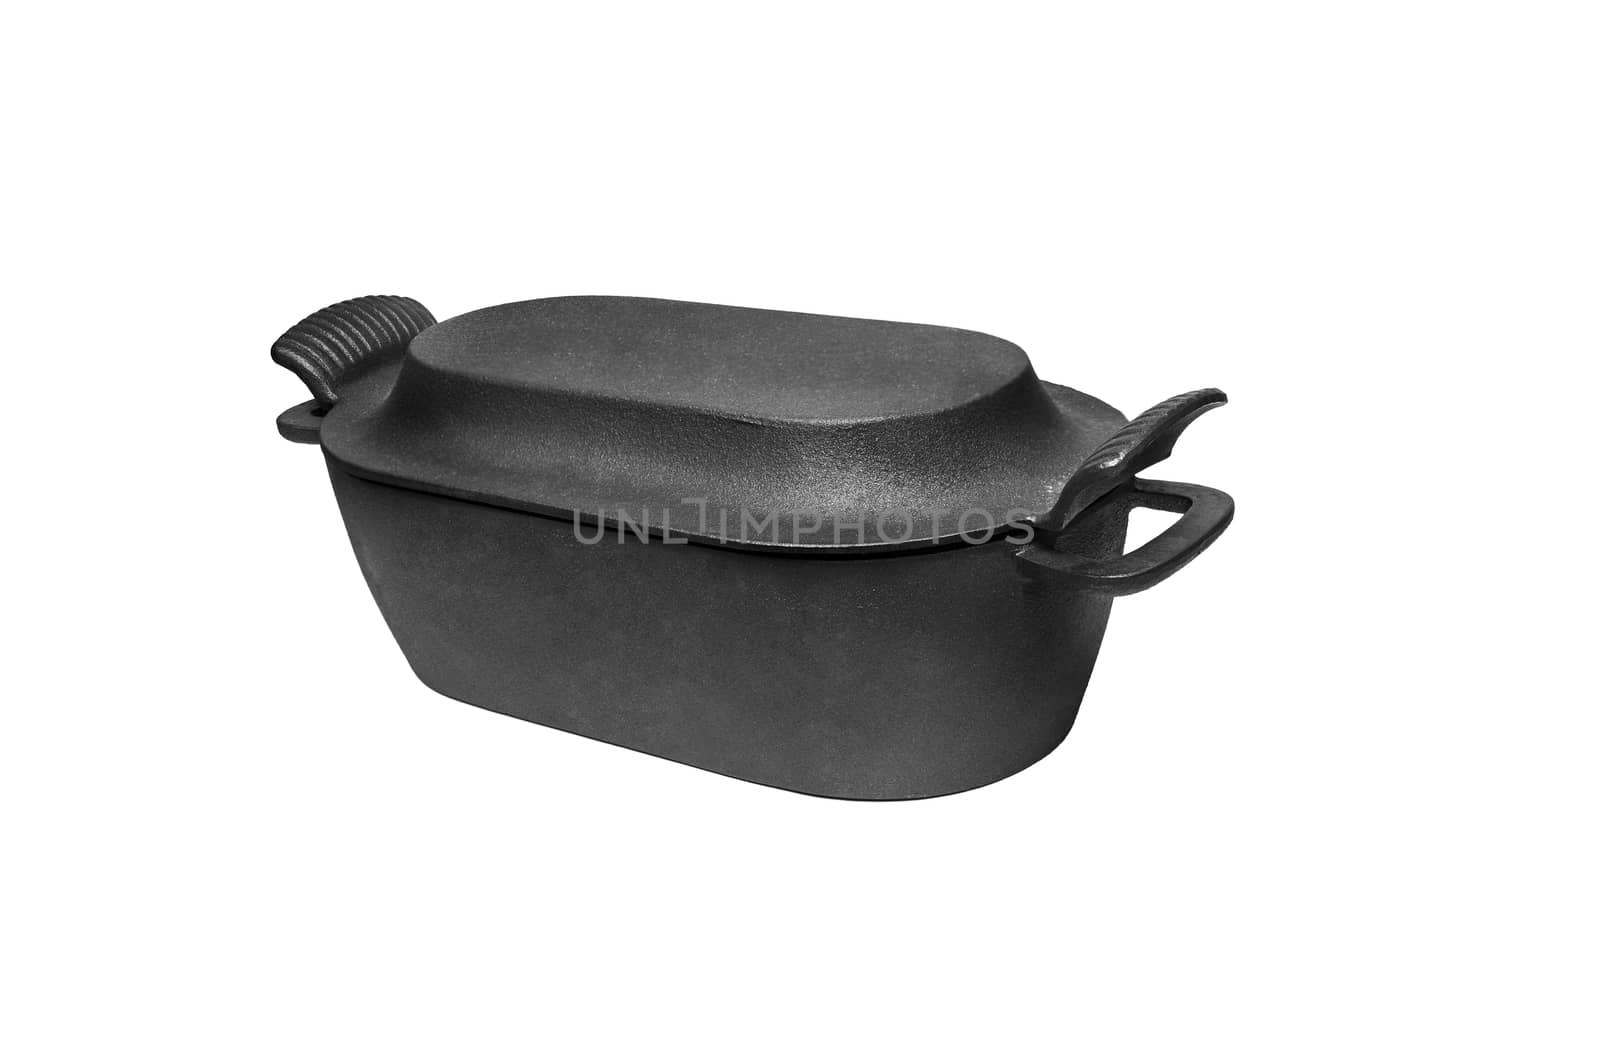 Cast iron pan with lid. Isolated on white background